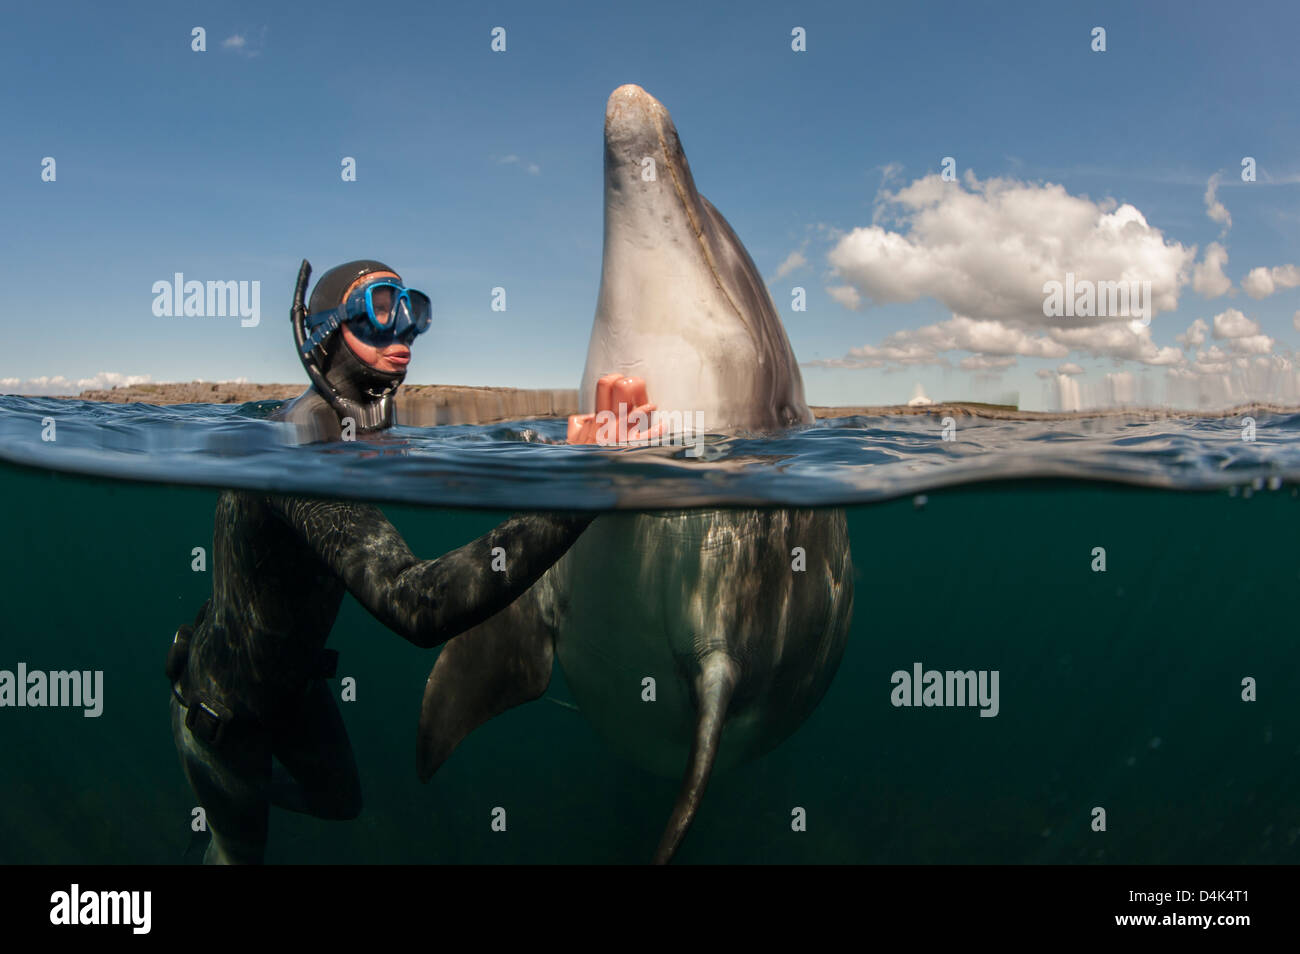 Diver scratching dolphin in water Stock Photo